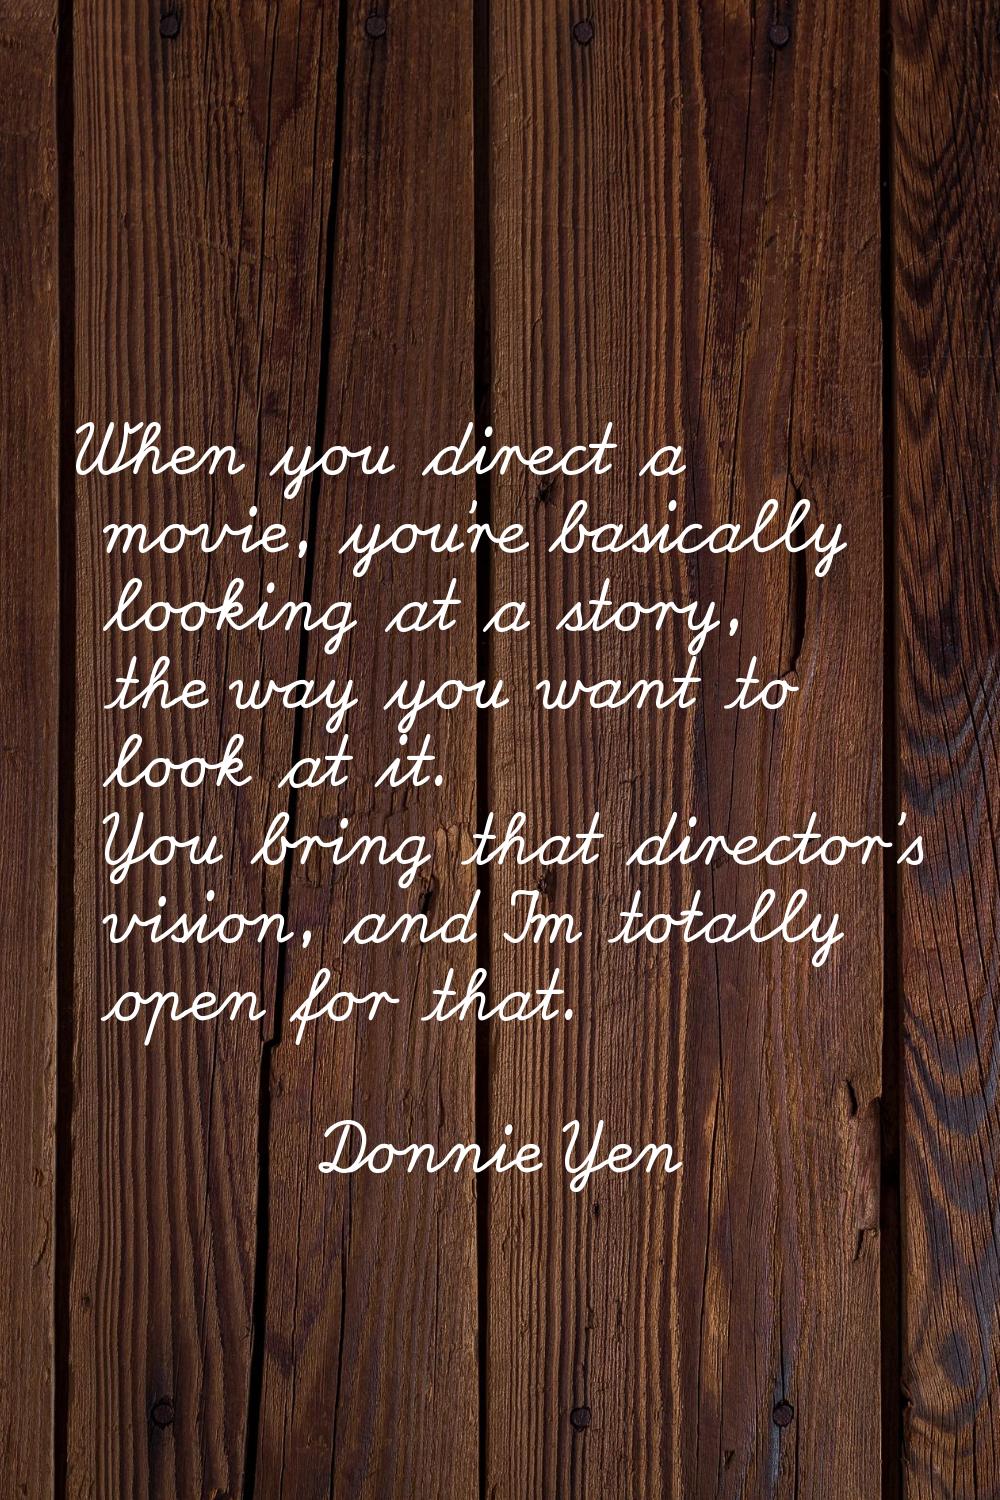 When you direct a movie, you're basically looking at a story, the way you want to look at it. You b